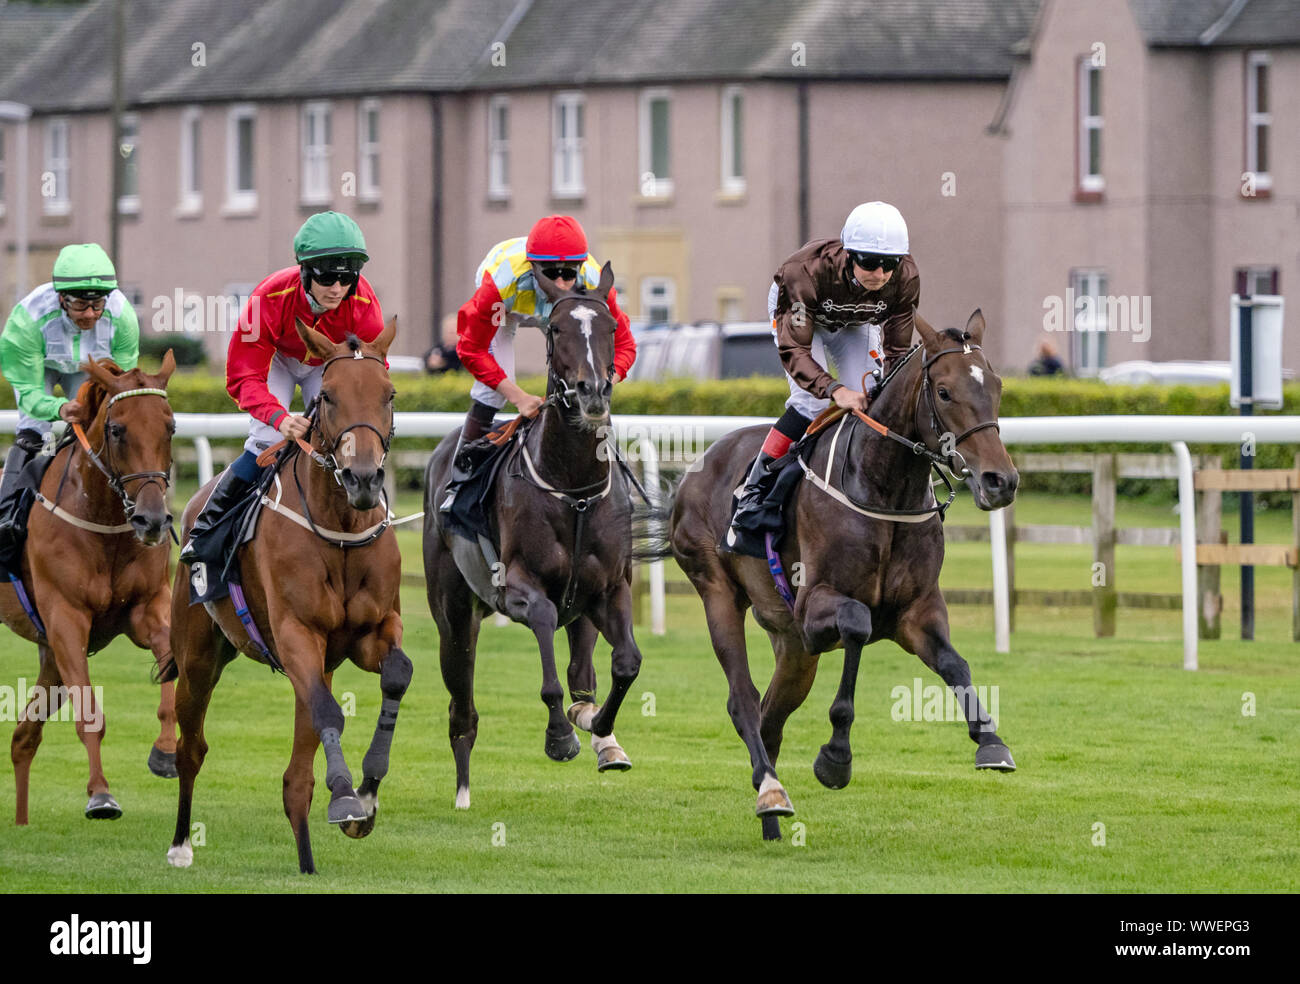 A moment in the Pommery Champagne Edinburgh Cup Handicap at Musselburgh - 14th September 2019. Stock Photo